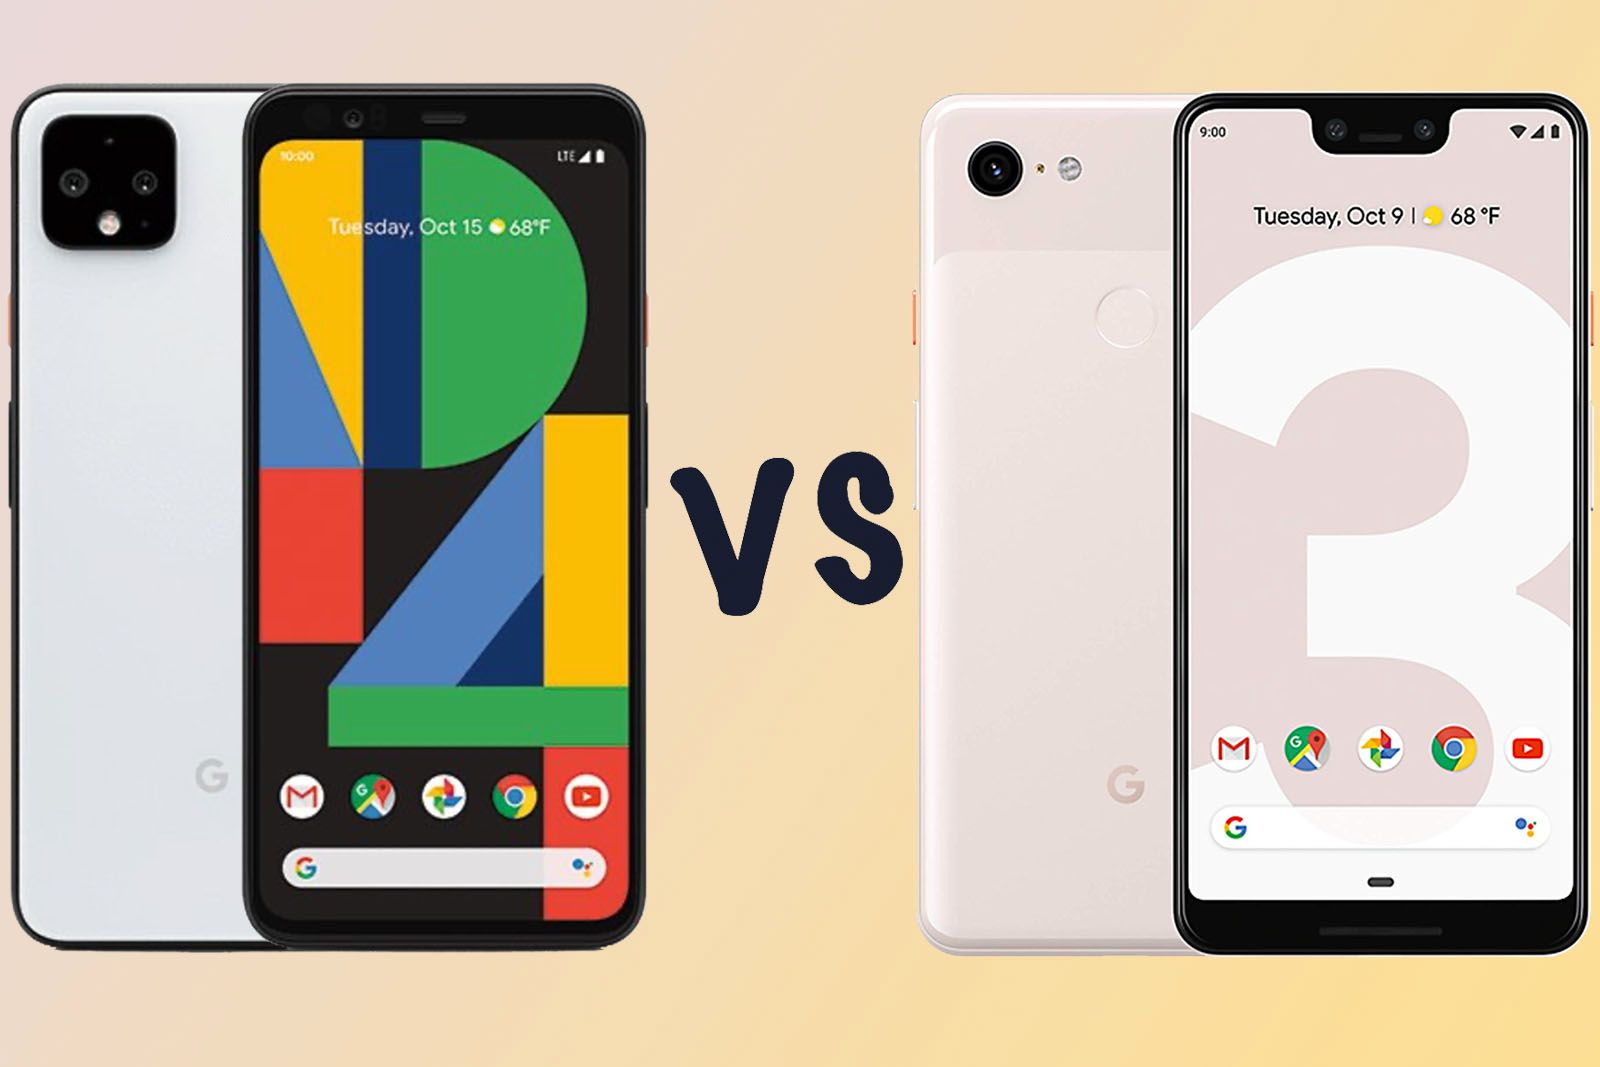 Google Pixel 4 Vs Pixel 3 Whats The Rumoured Difference image 1